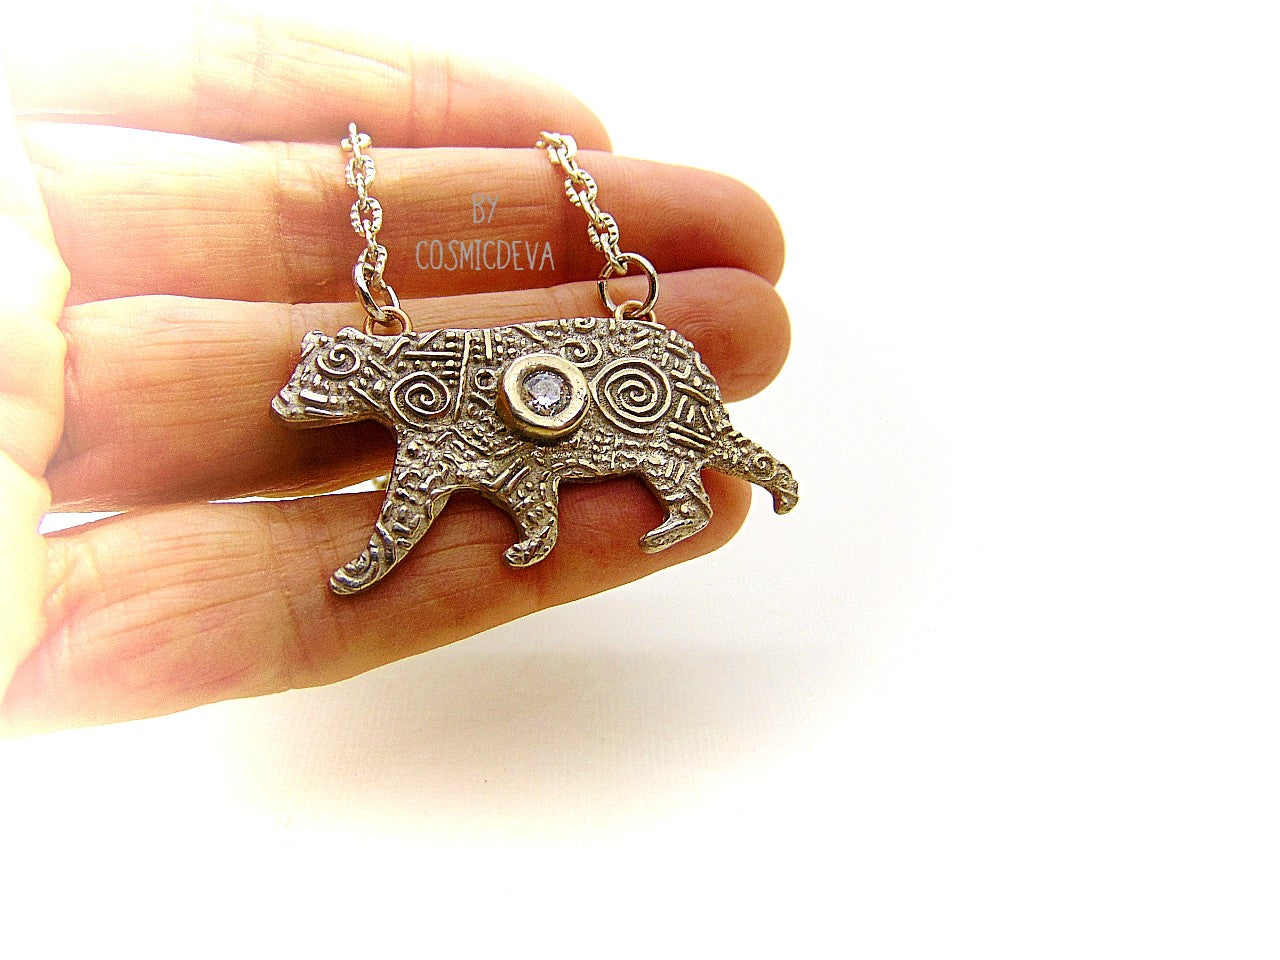 Inspire yourself to be strong and graceful like a polar bear with this handcrafted Silver Bear Spirit Animal Pendant Bronze Necklace. Crafted with a kiln fired silver bronze bear, accented with a diamond cut cubic zirconia gemstone, this pendant suspends from an 18-20 inch long chain. Wear this powerful piece and feel the power of the wild!